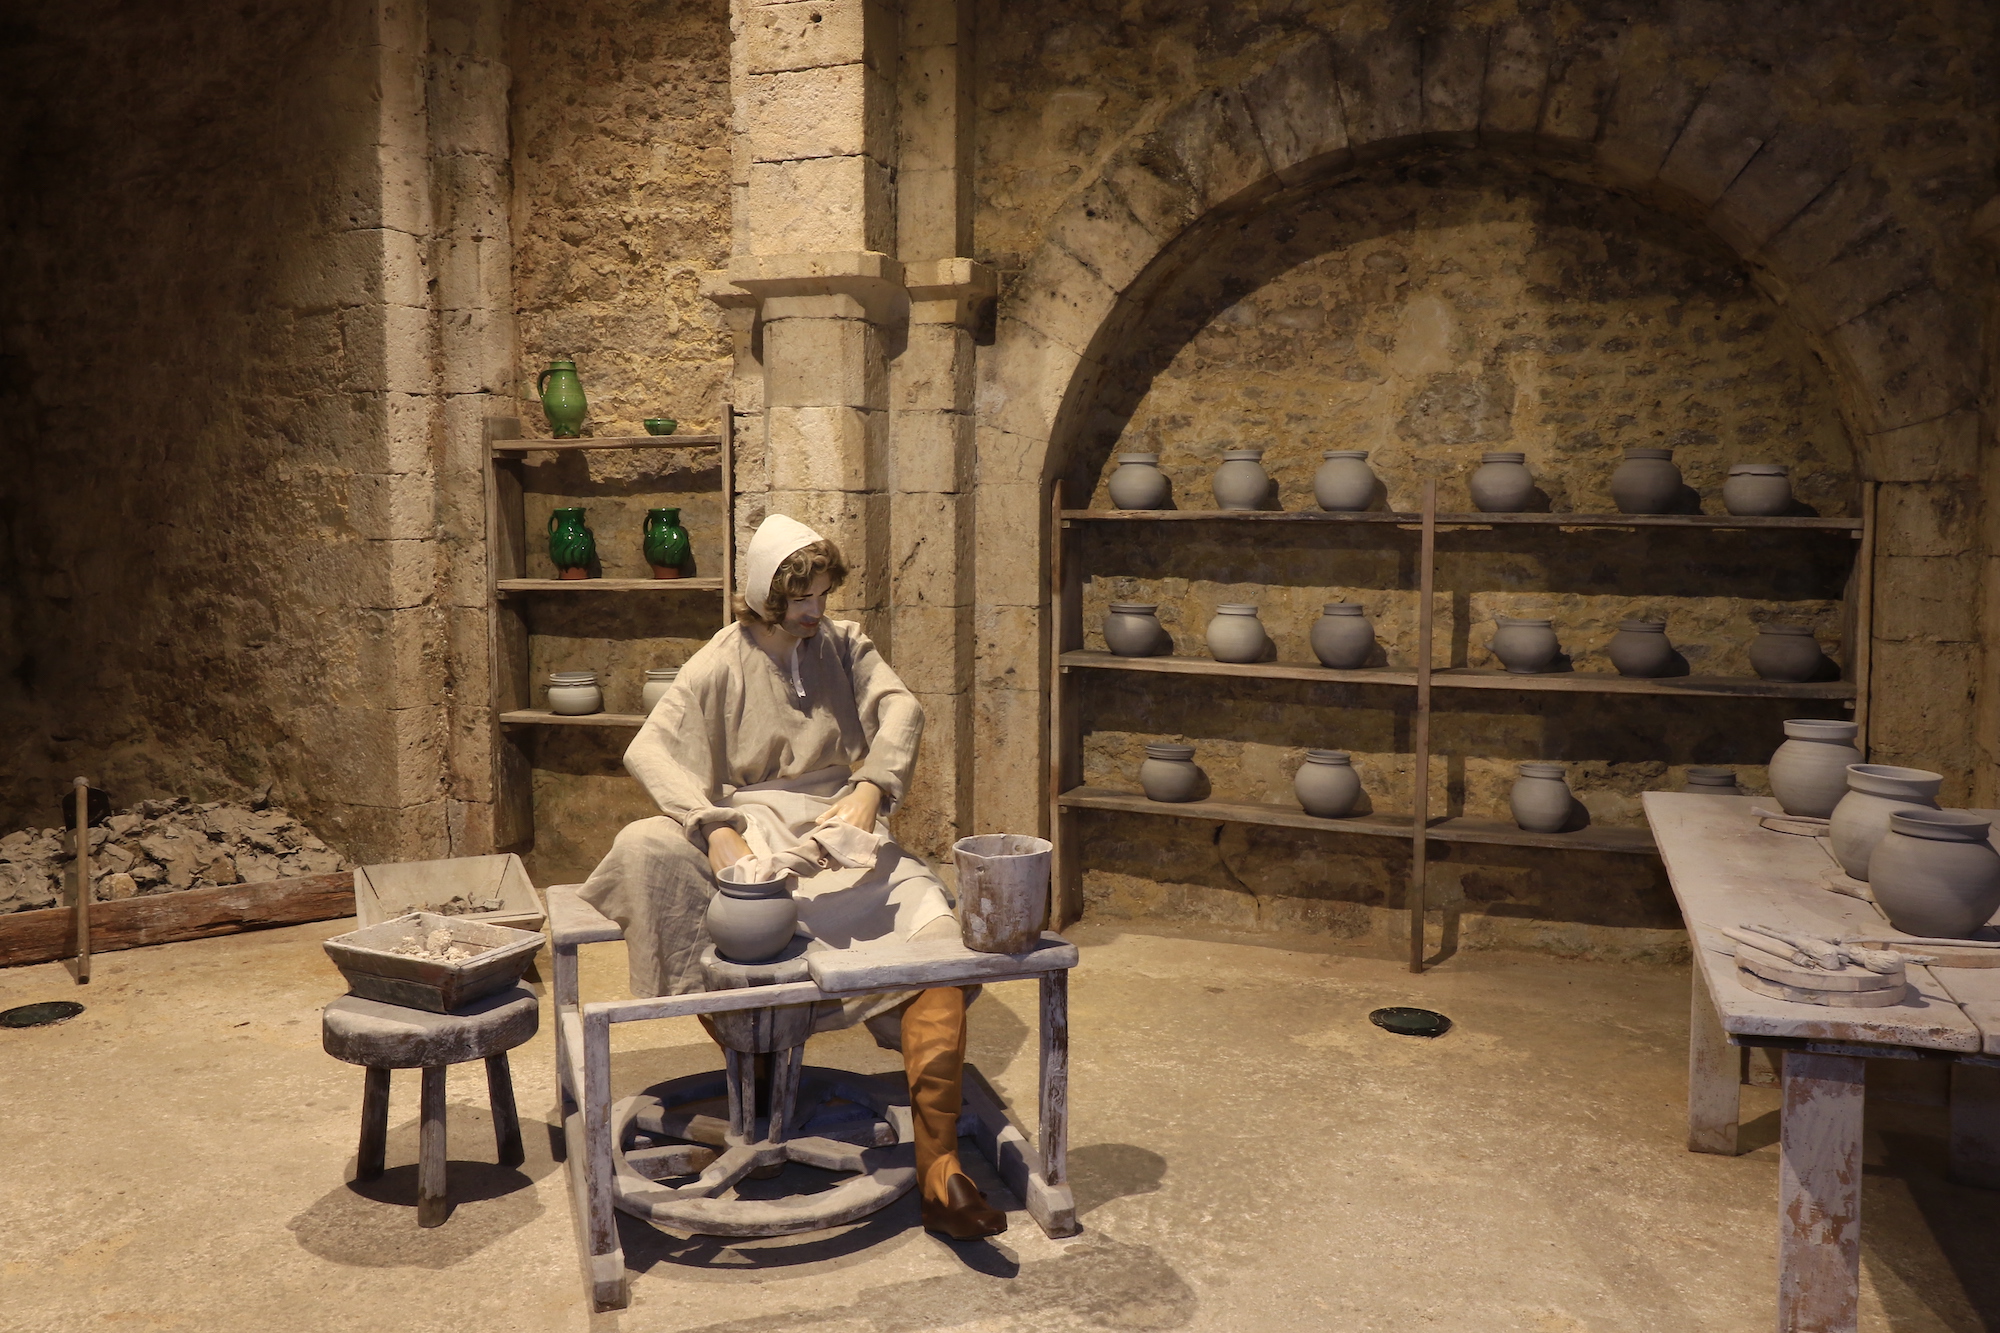 Pottery exhibit at the Tithe Barn